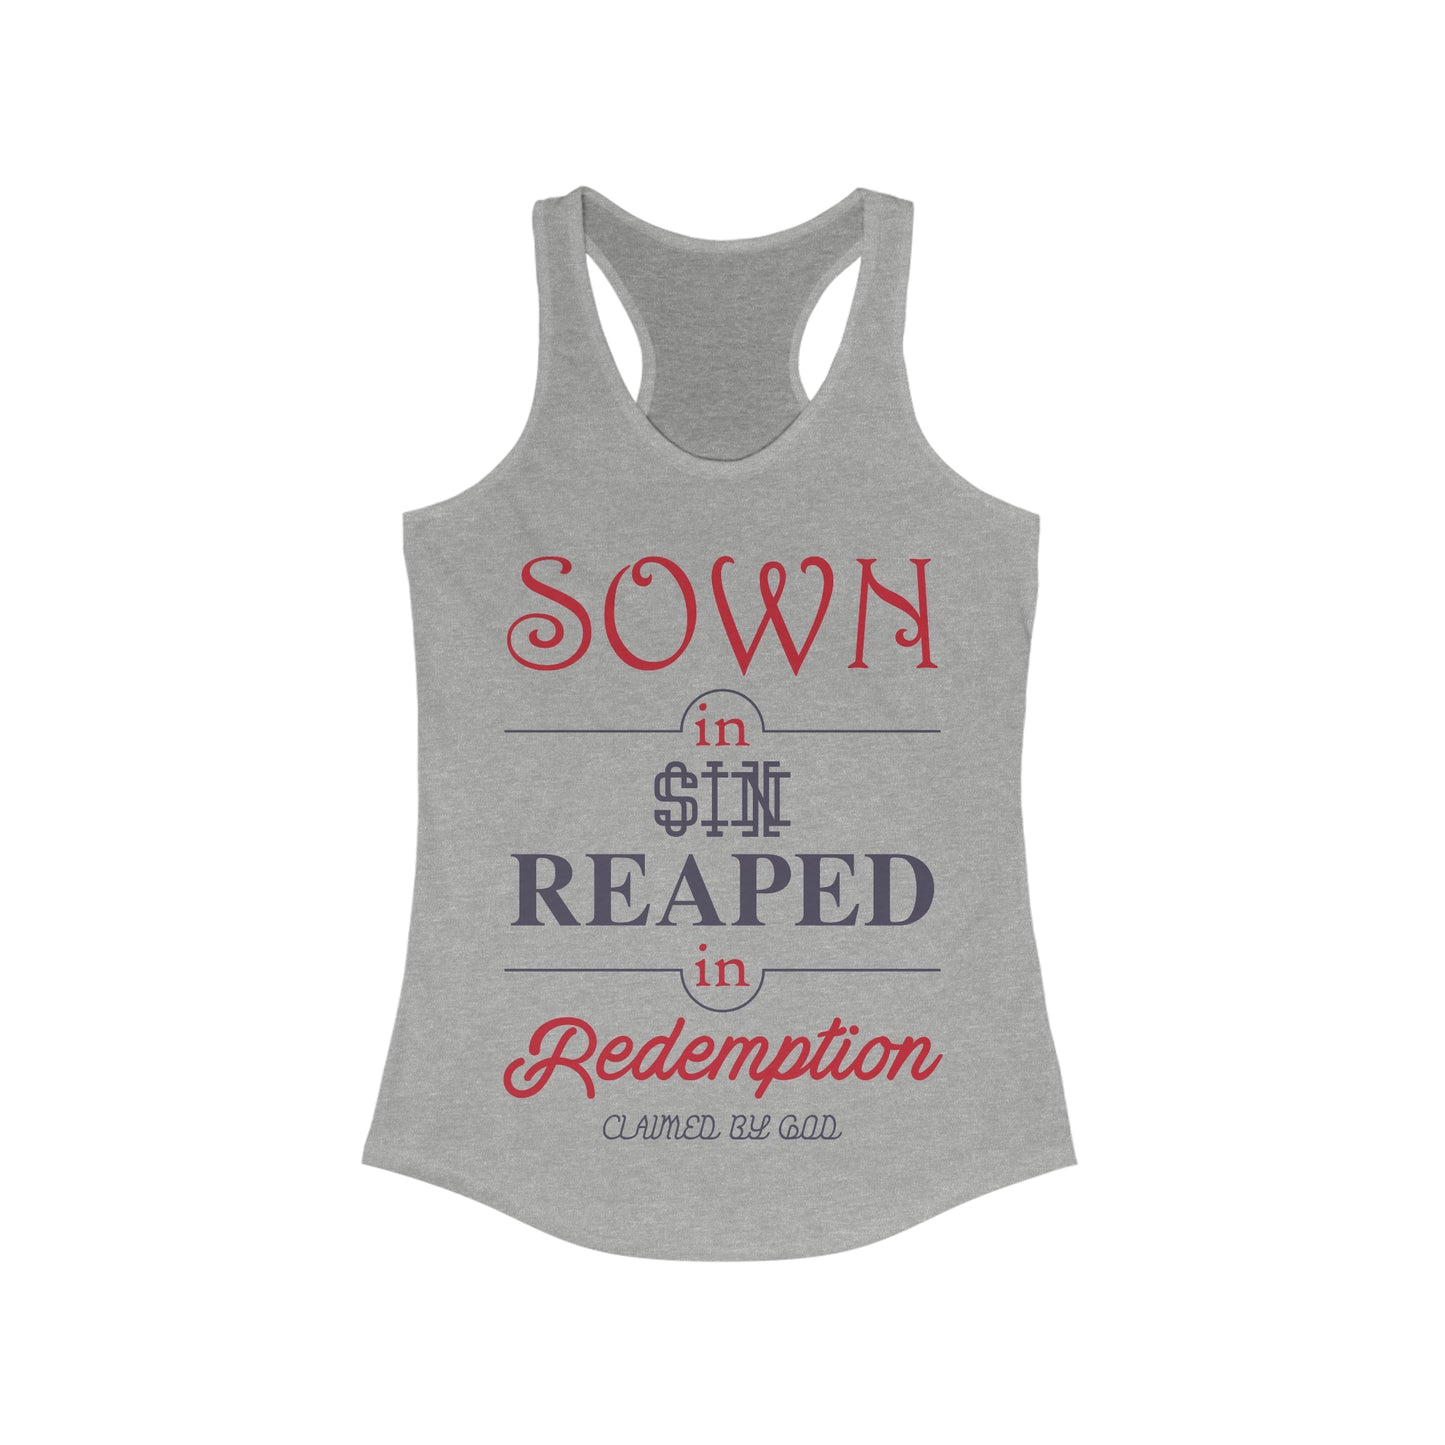 Sown in sin reaped in redemption slim fit tank-top